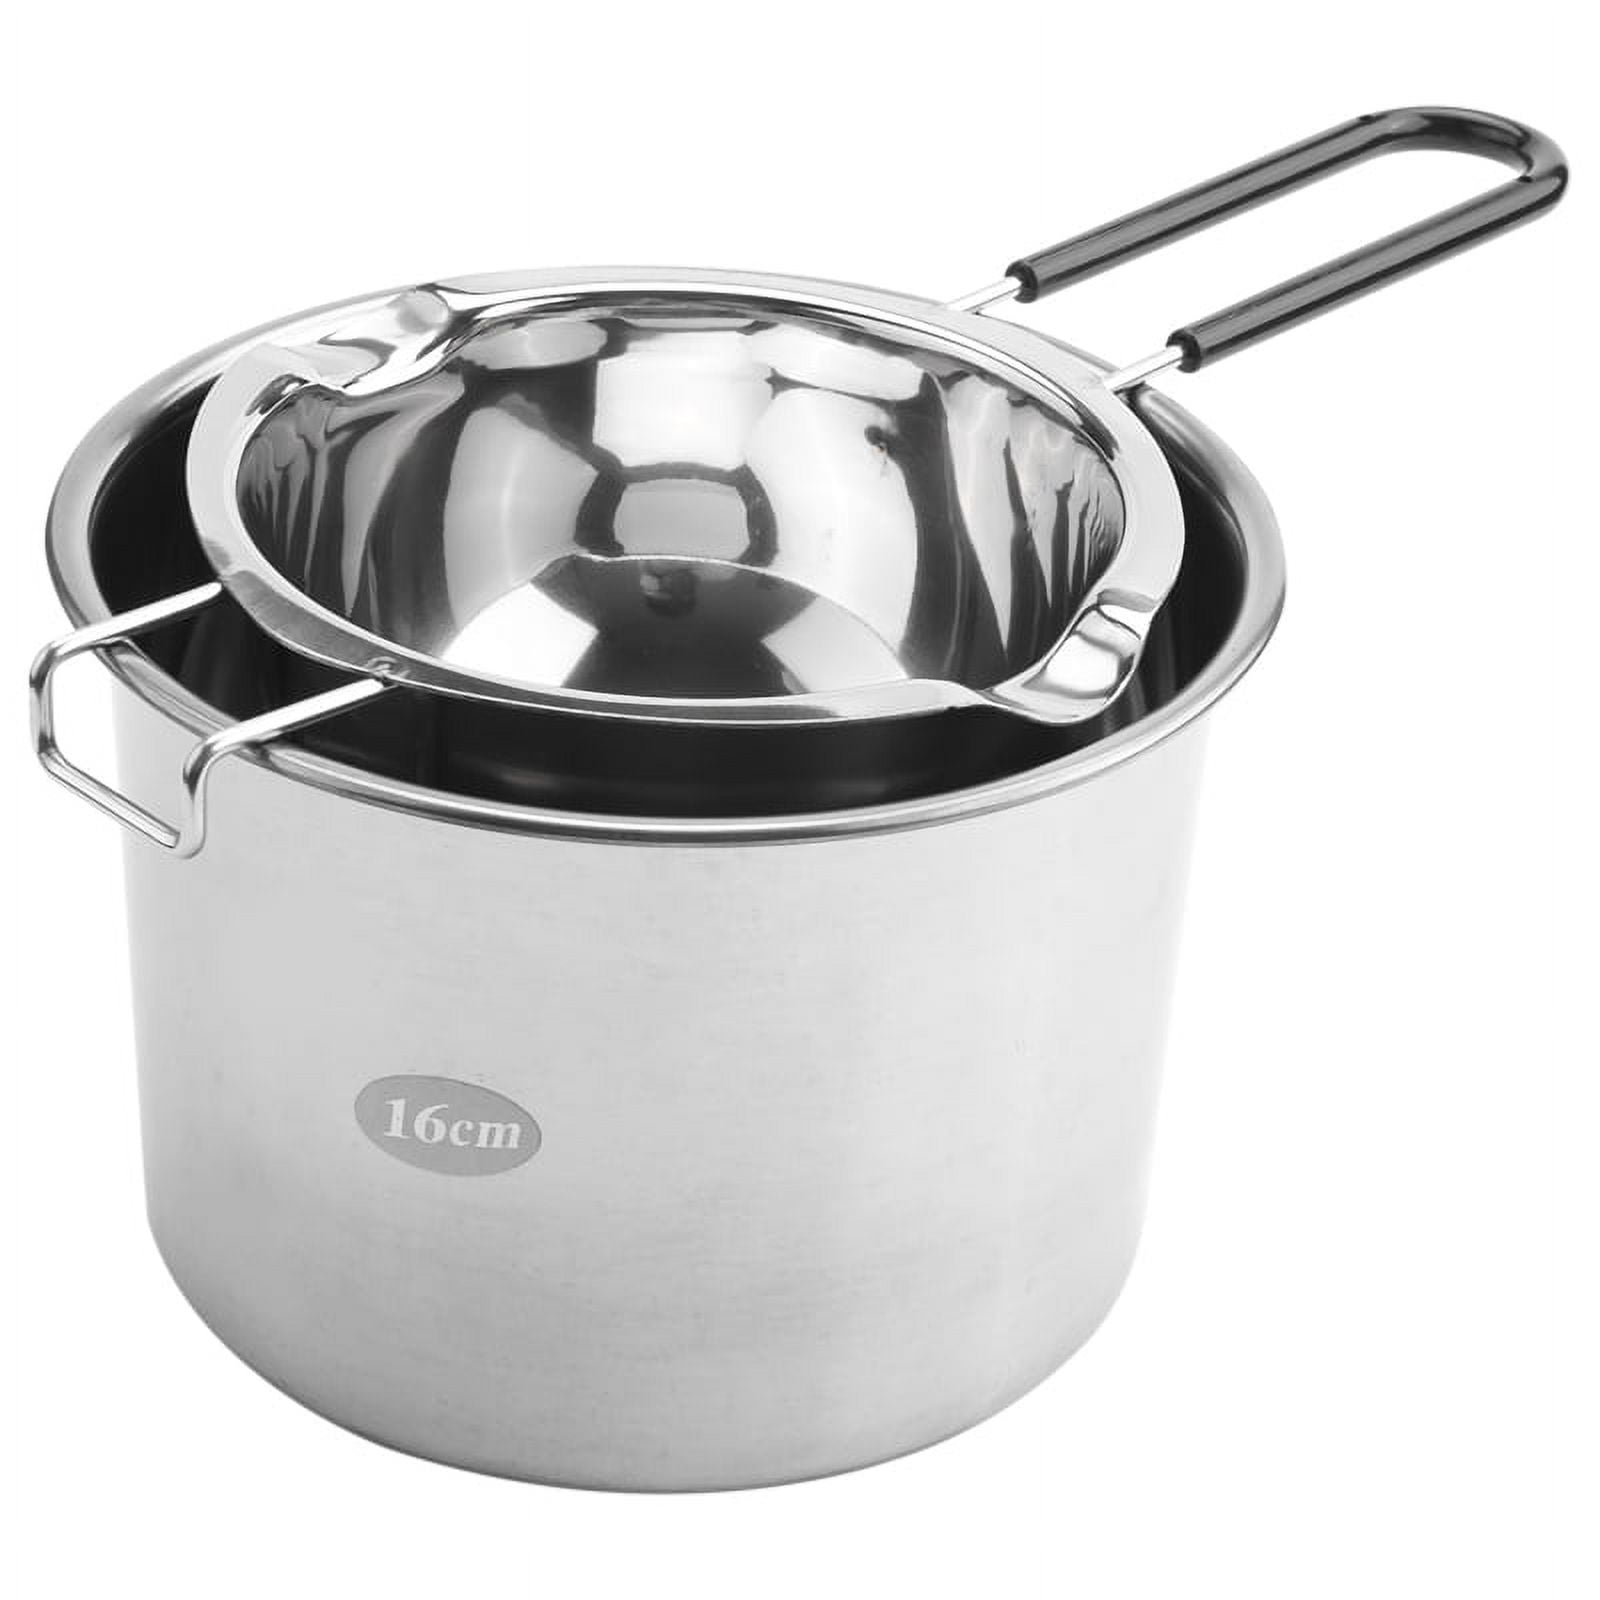 Double Boiler Pot Set for Melting Chocolate, Butter, Cheese